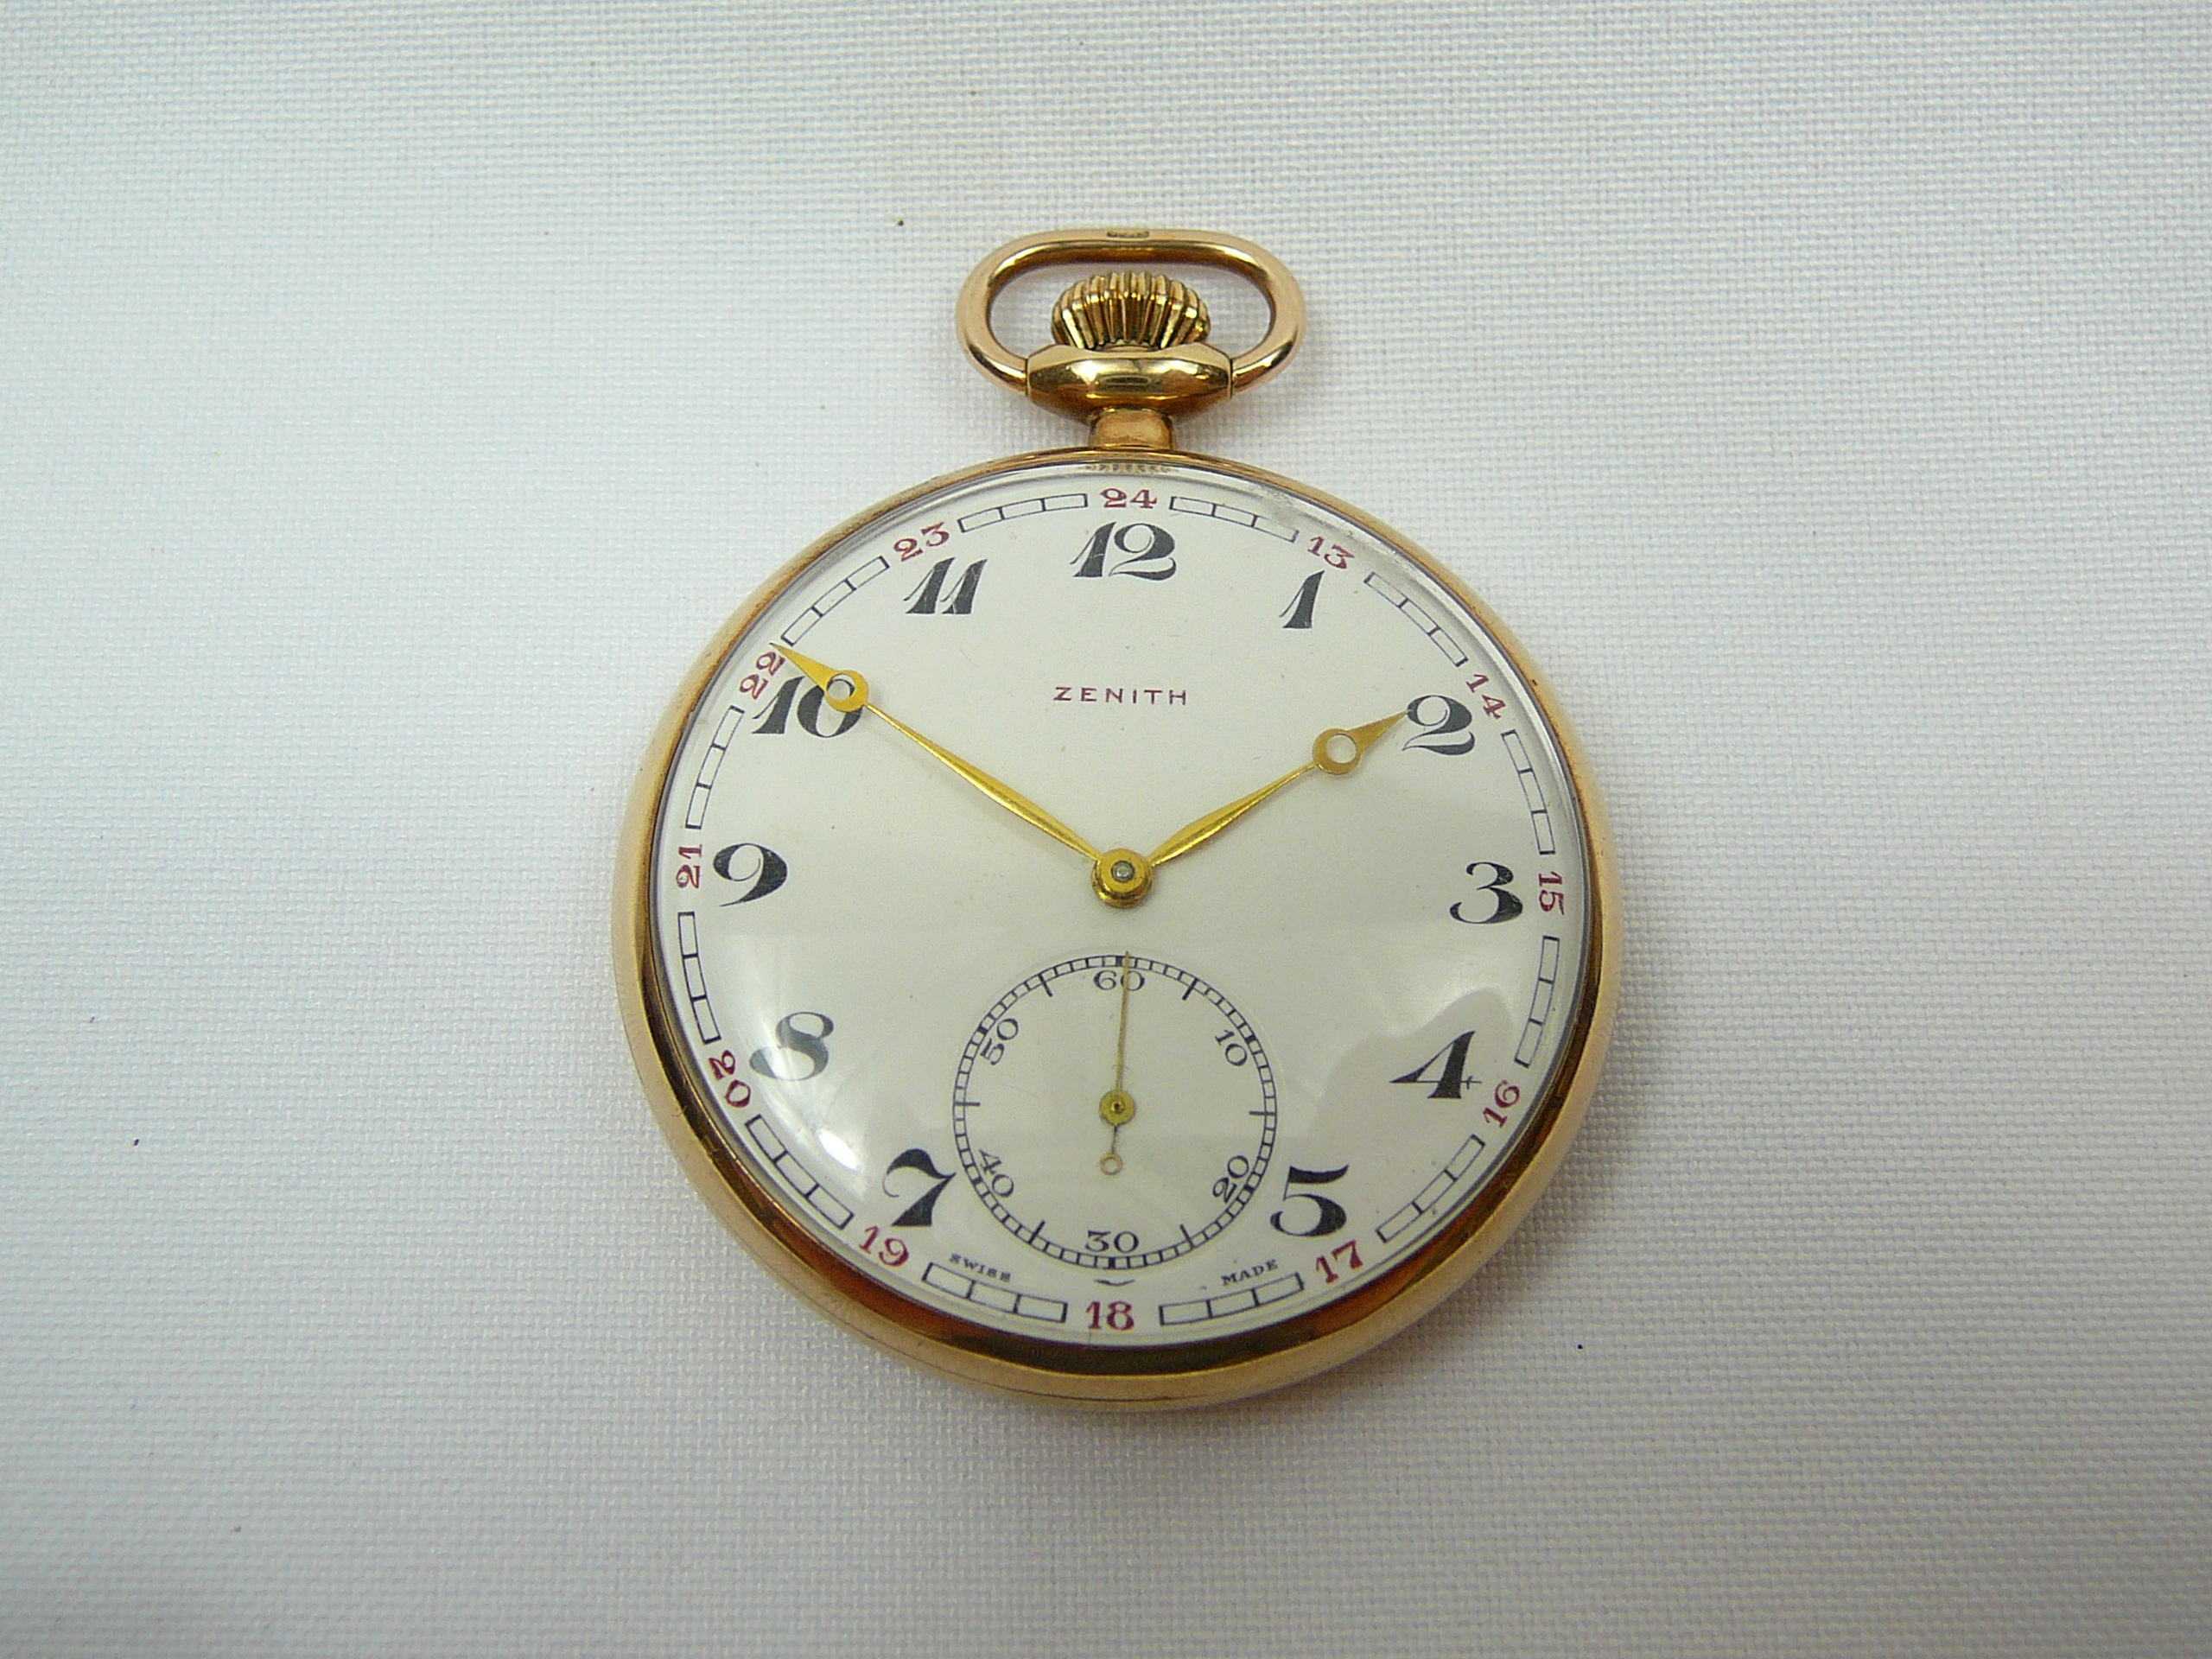 Gents gold Zenith pocketwatch - Image 5 of 10